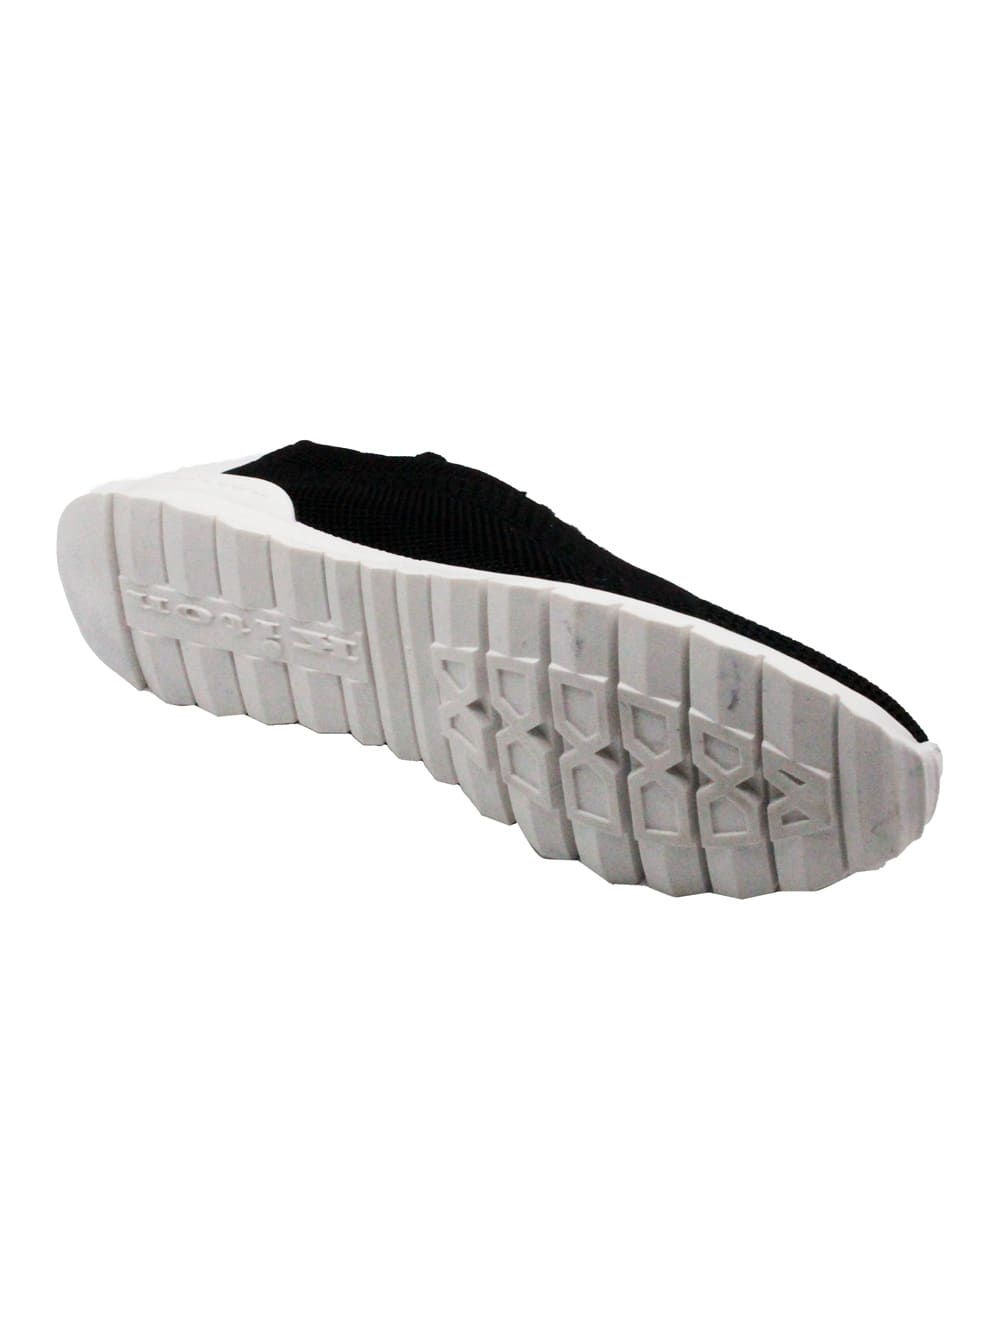 Shop Kiton Sneakers Made Of Knitted Fabric. The Bottom, With A White Sole, Is Flexible And Extralight; The Elas In Black